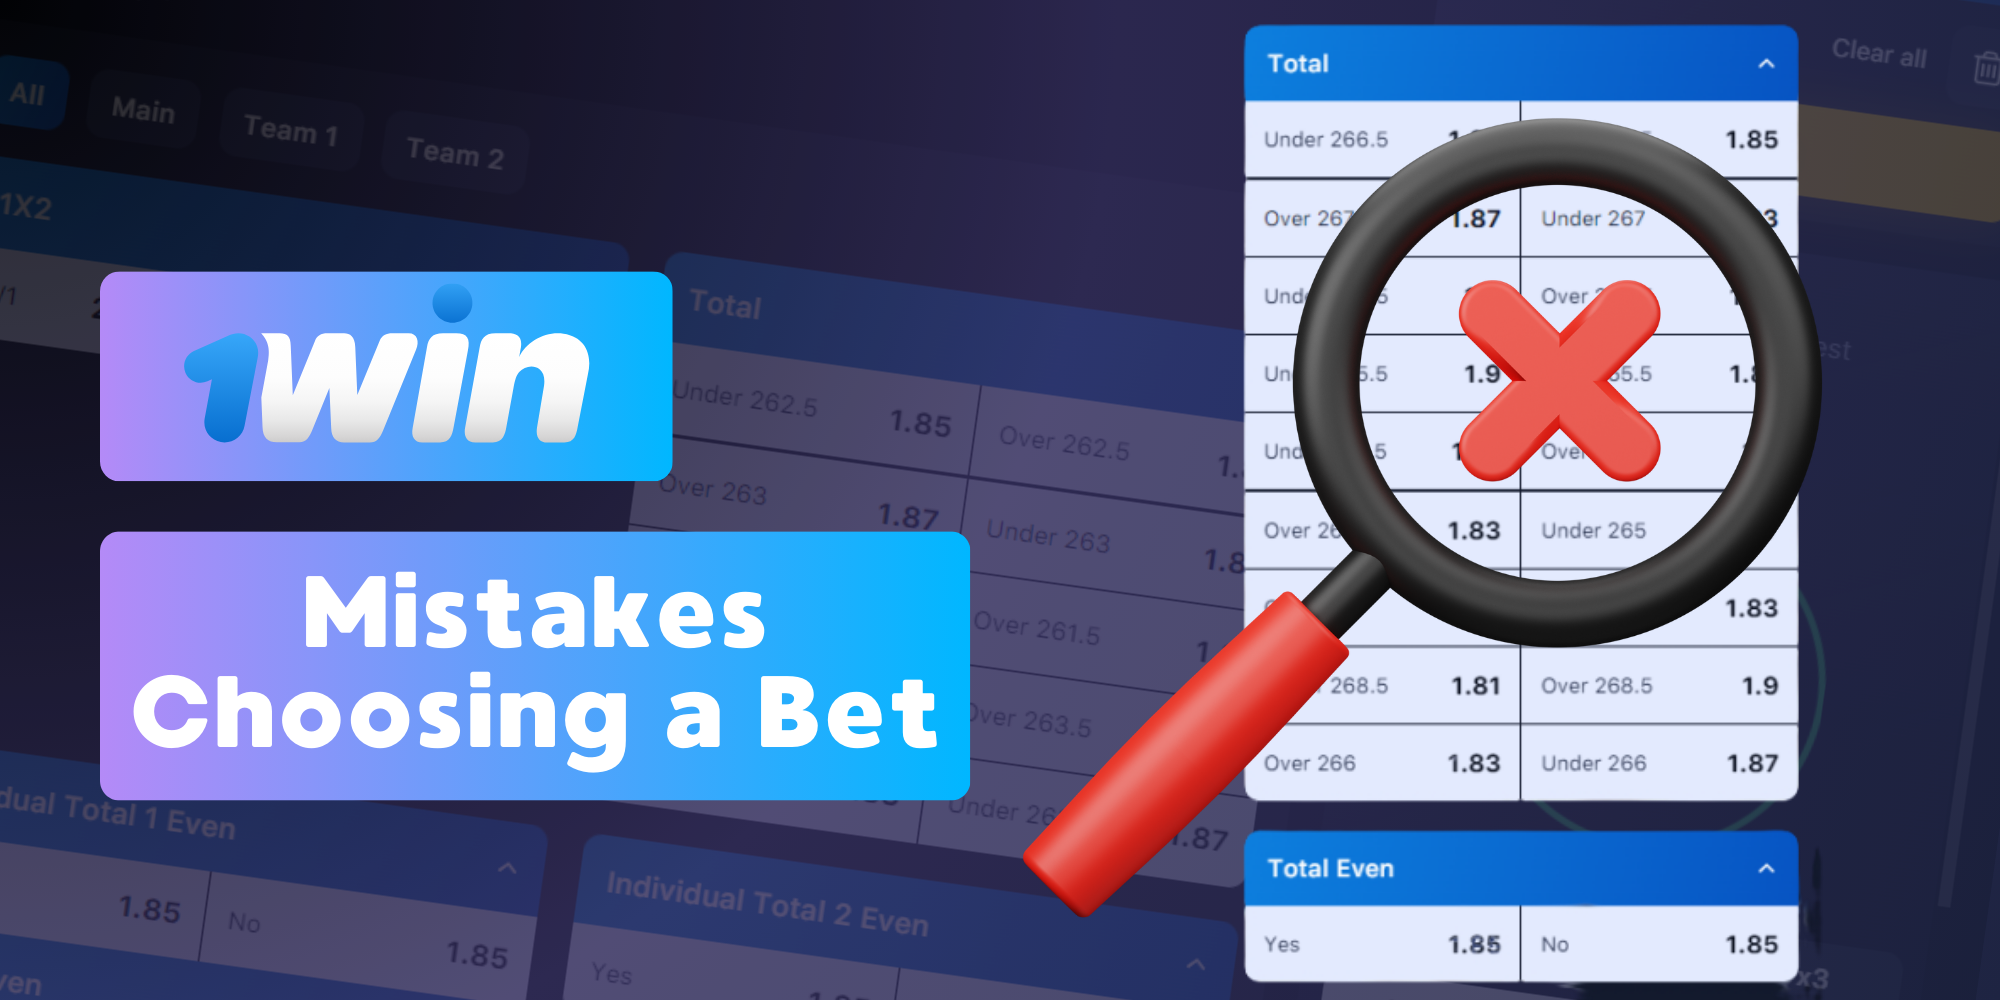 1Win players in India often make several basic mistakes when choosing a bet